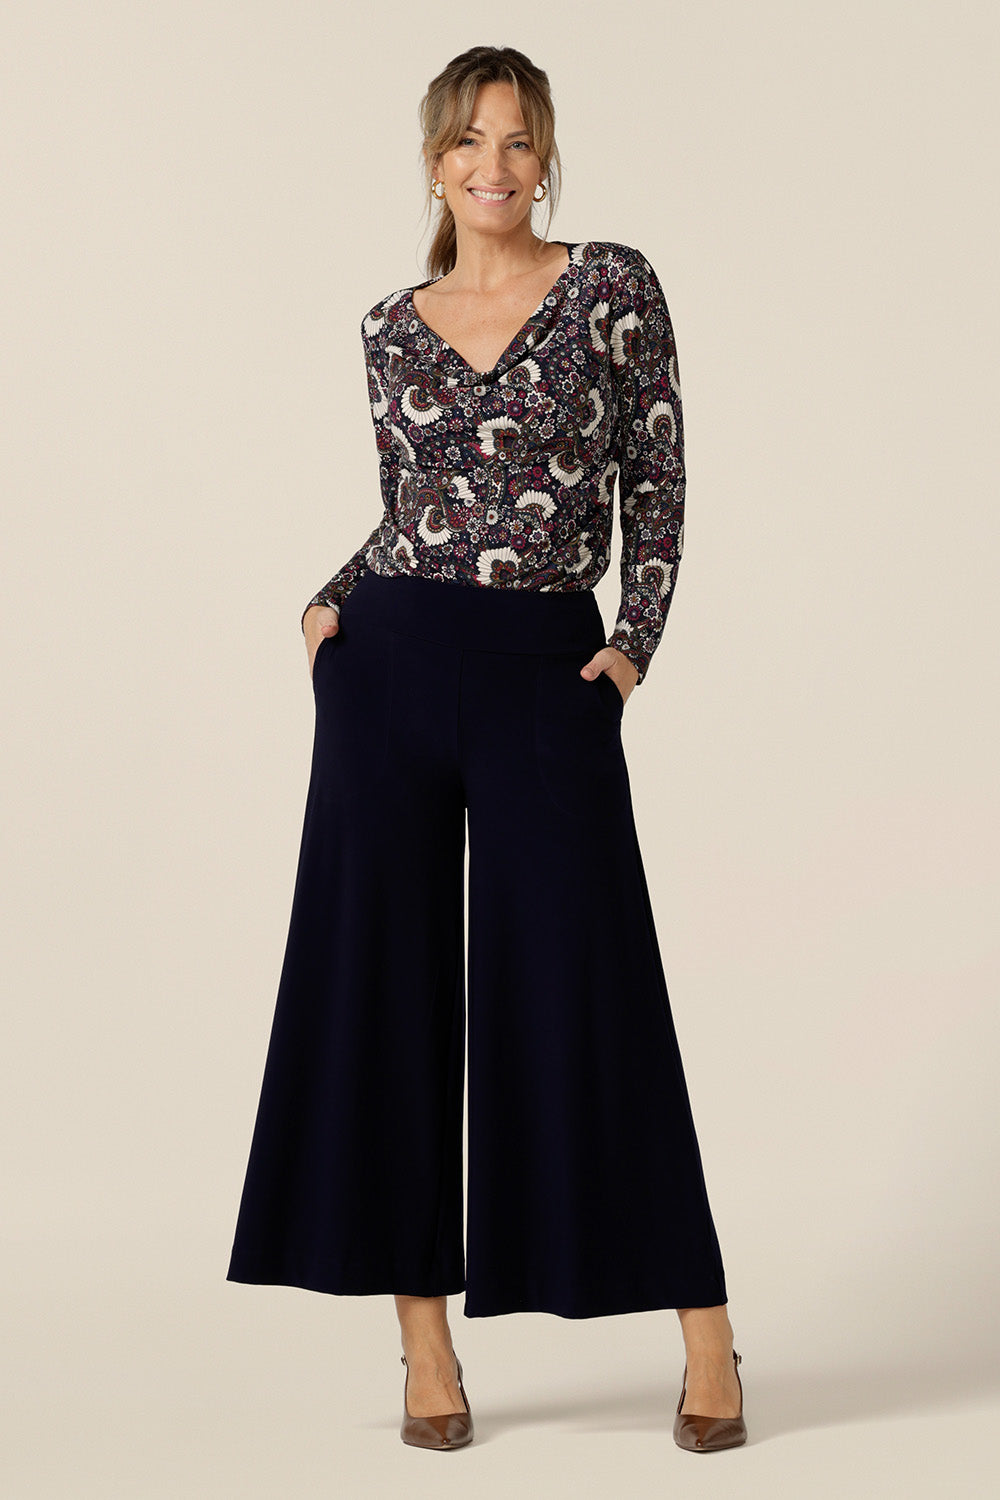 A size 10 woman wears a long sleeve women's cowl neck top in paisley print jersey. Worn with wide-leg navy pants, this top is a comfortable top for work and weekend wear. 